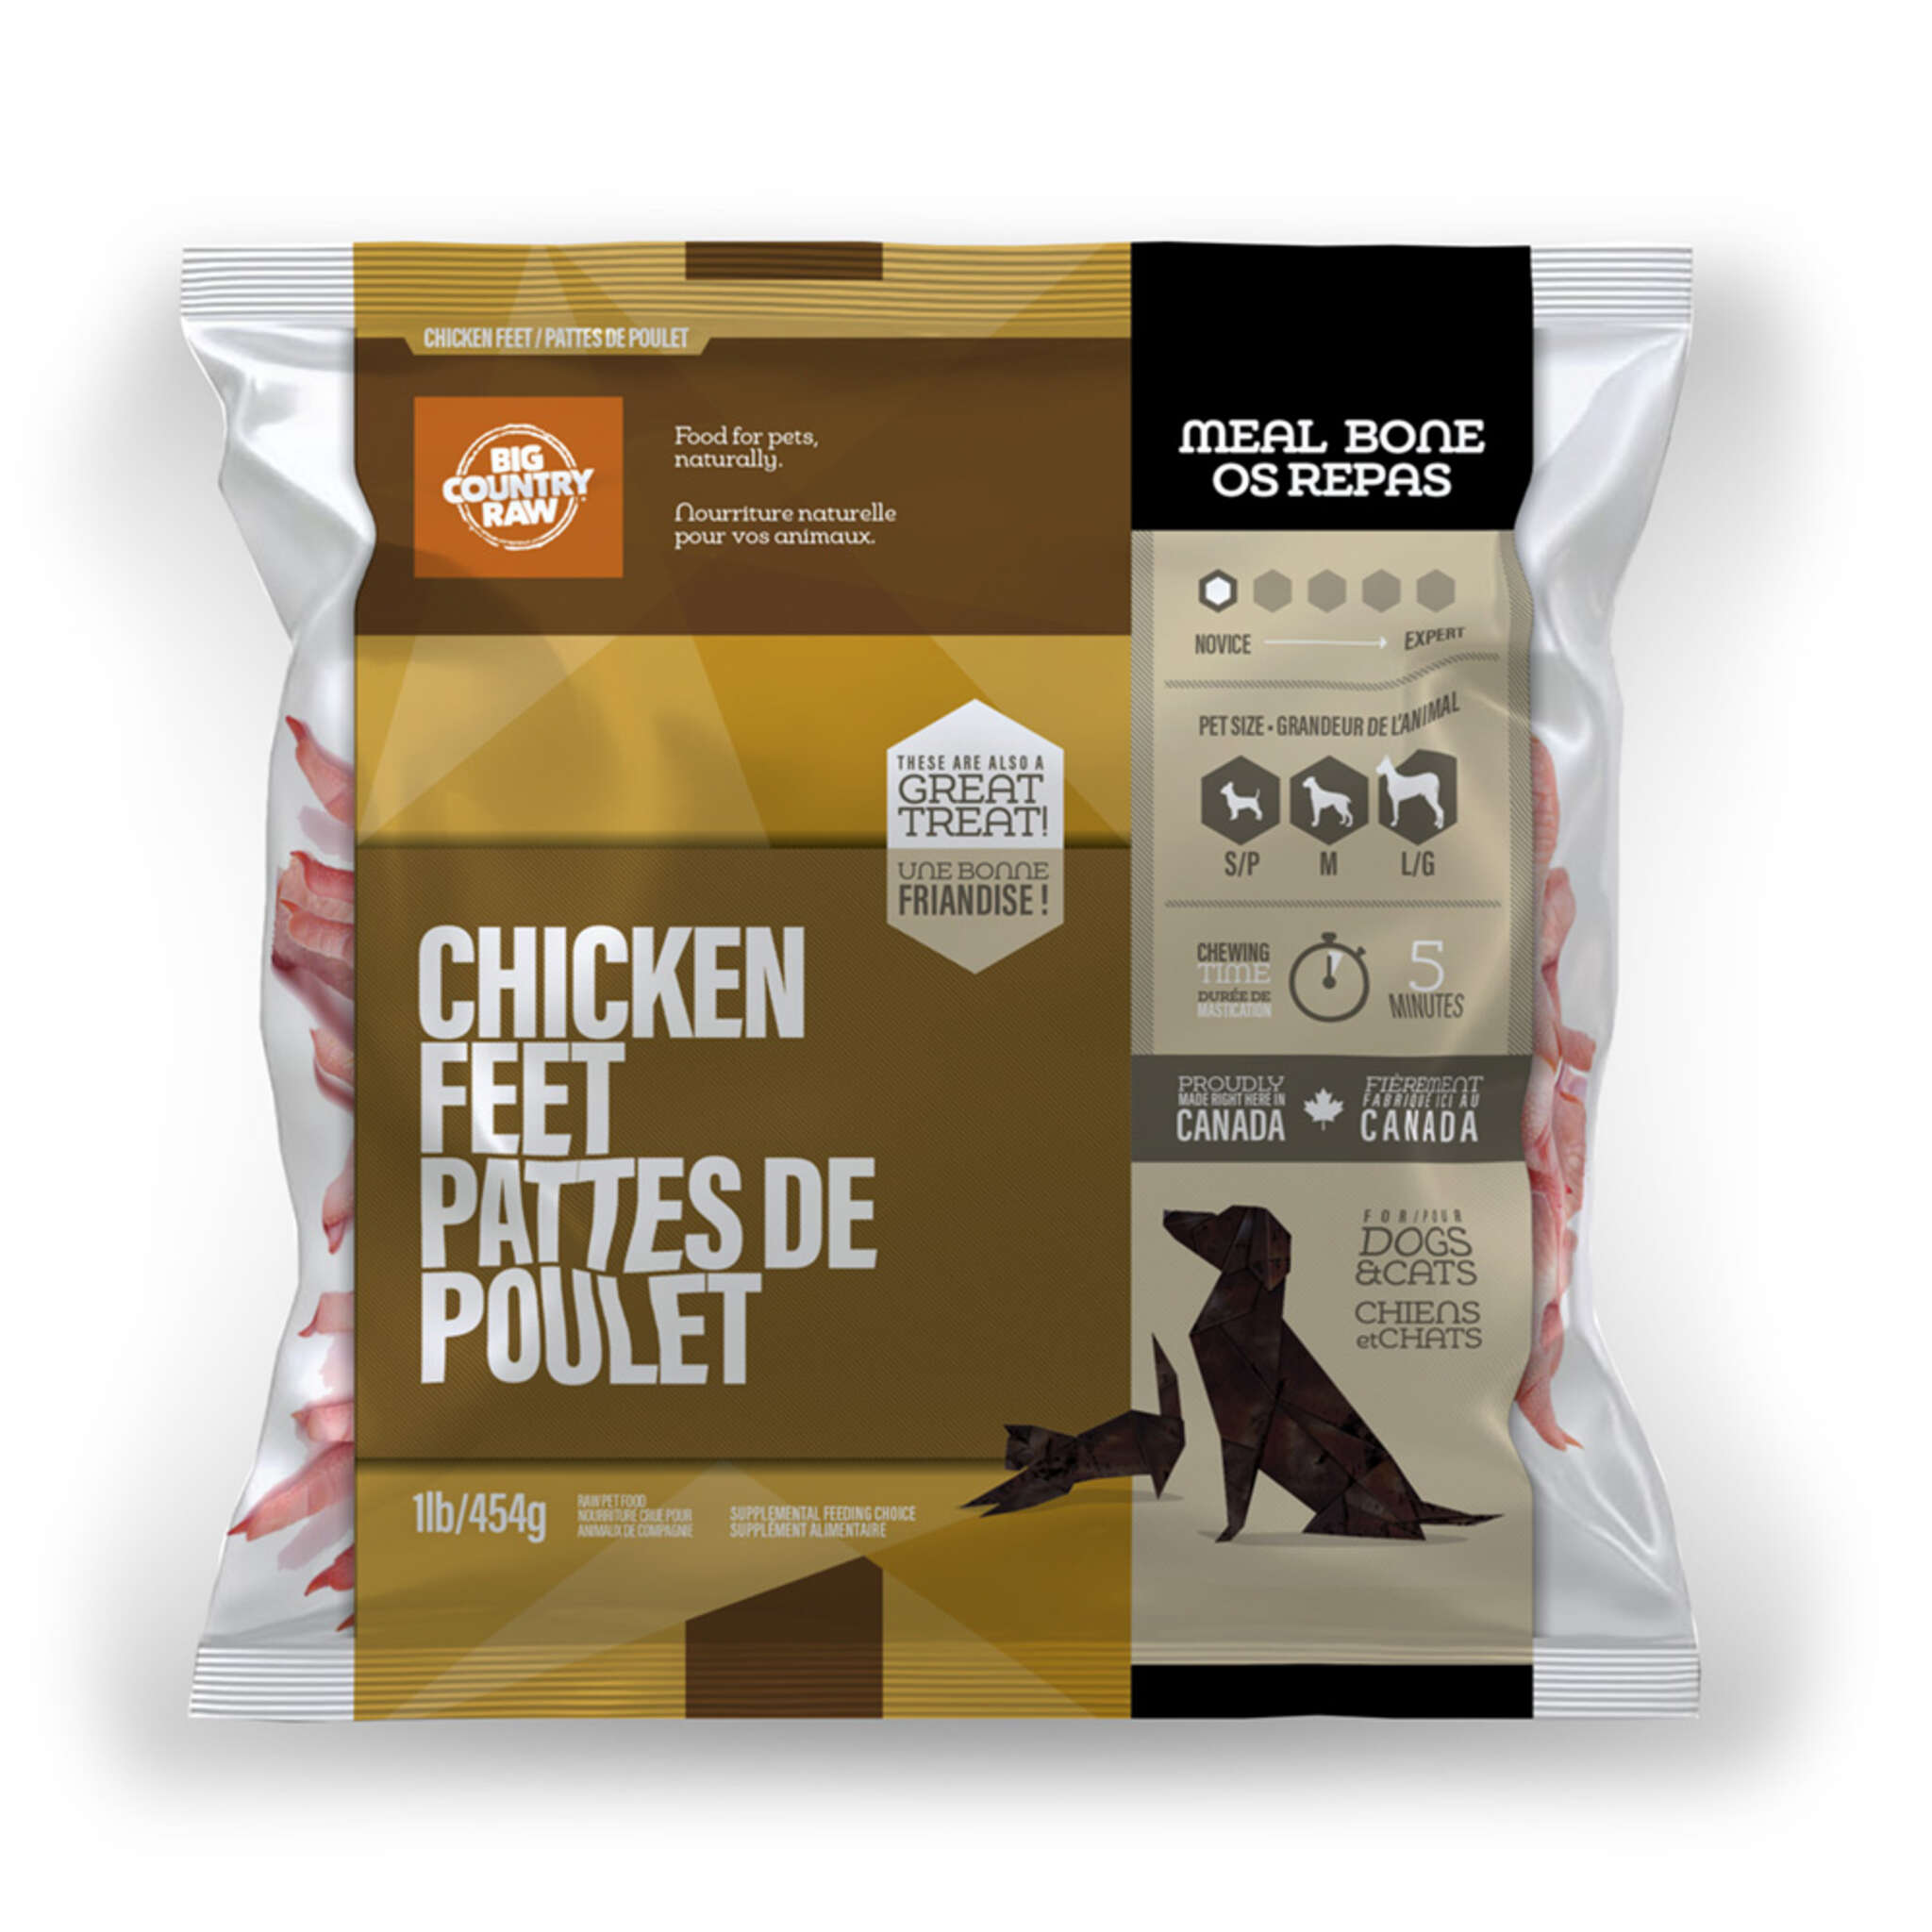 A bag of Big Country Raw Chicken feet, Cat or Dog treat, 1 lb, roughly 5 minutes chewing time per treat, requires freezing.